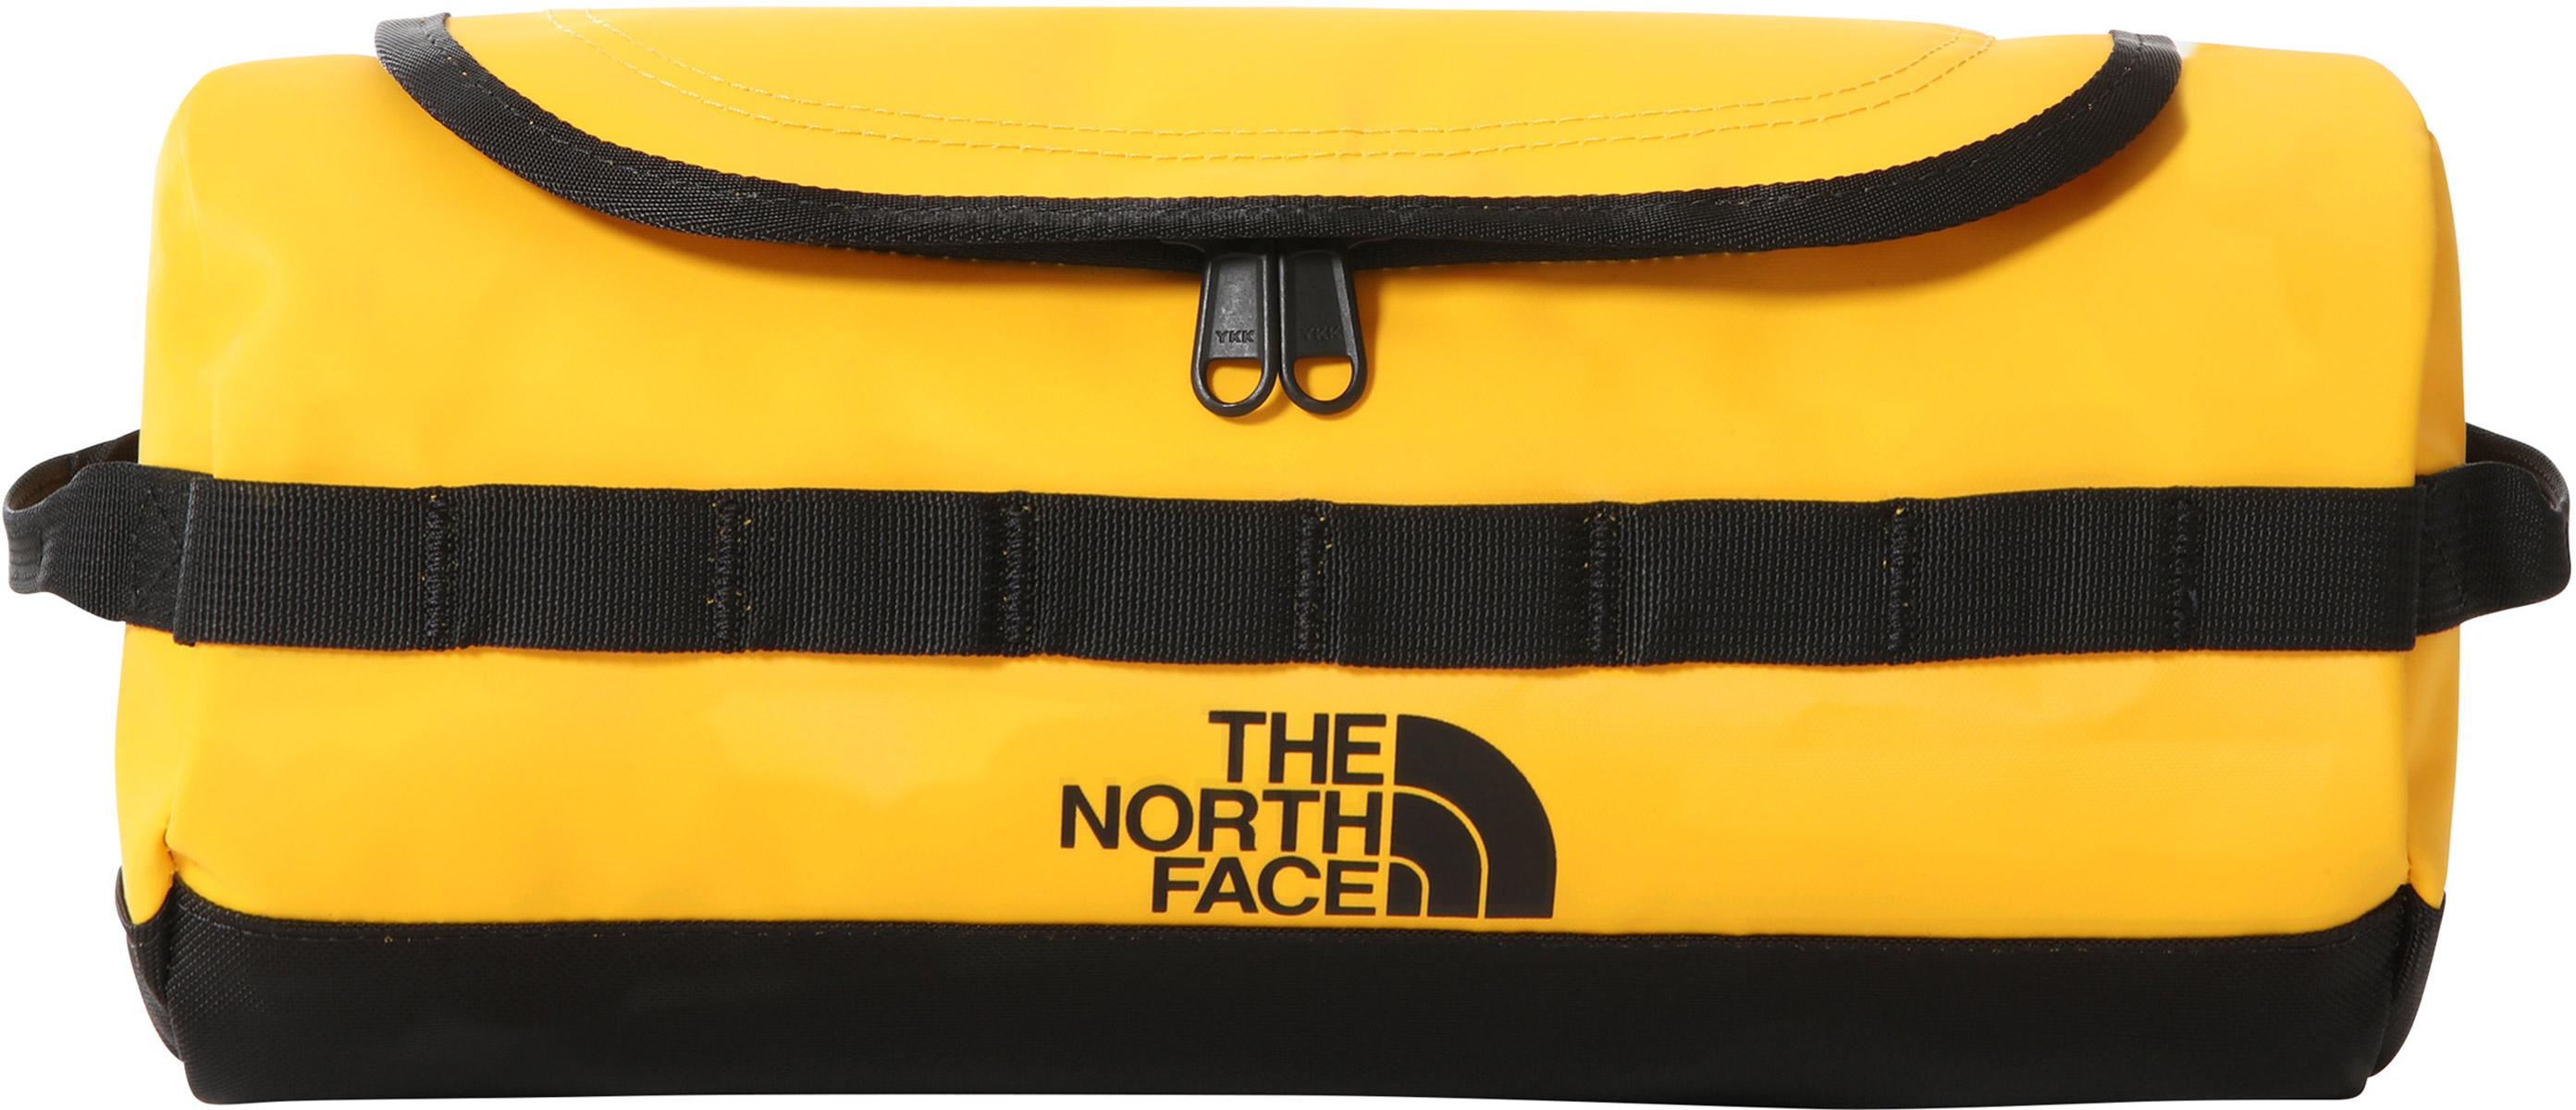 The North Face Travel Canister (large) - Summit Gold/tnf Black